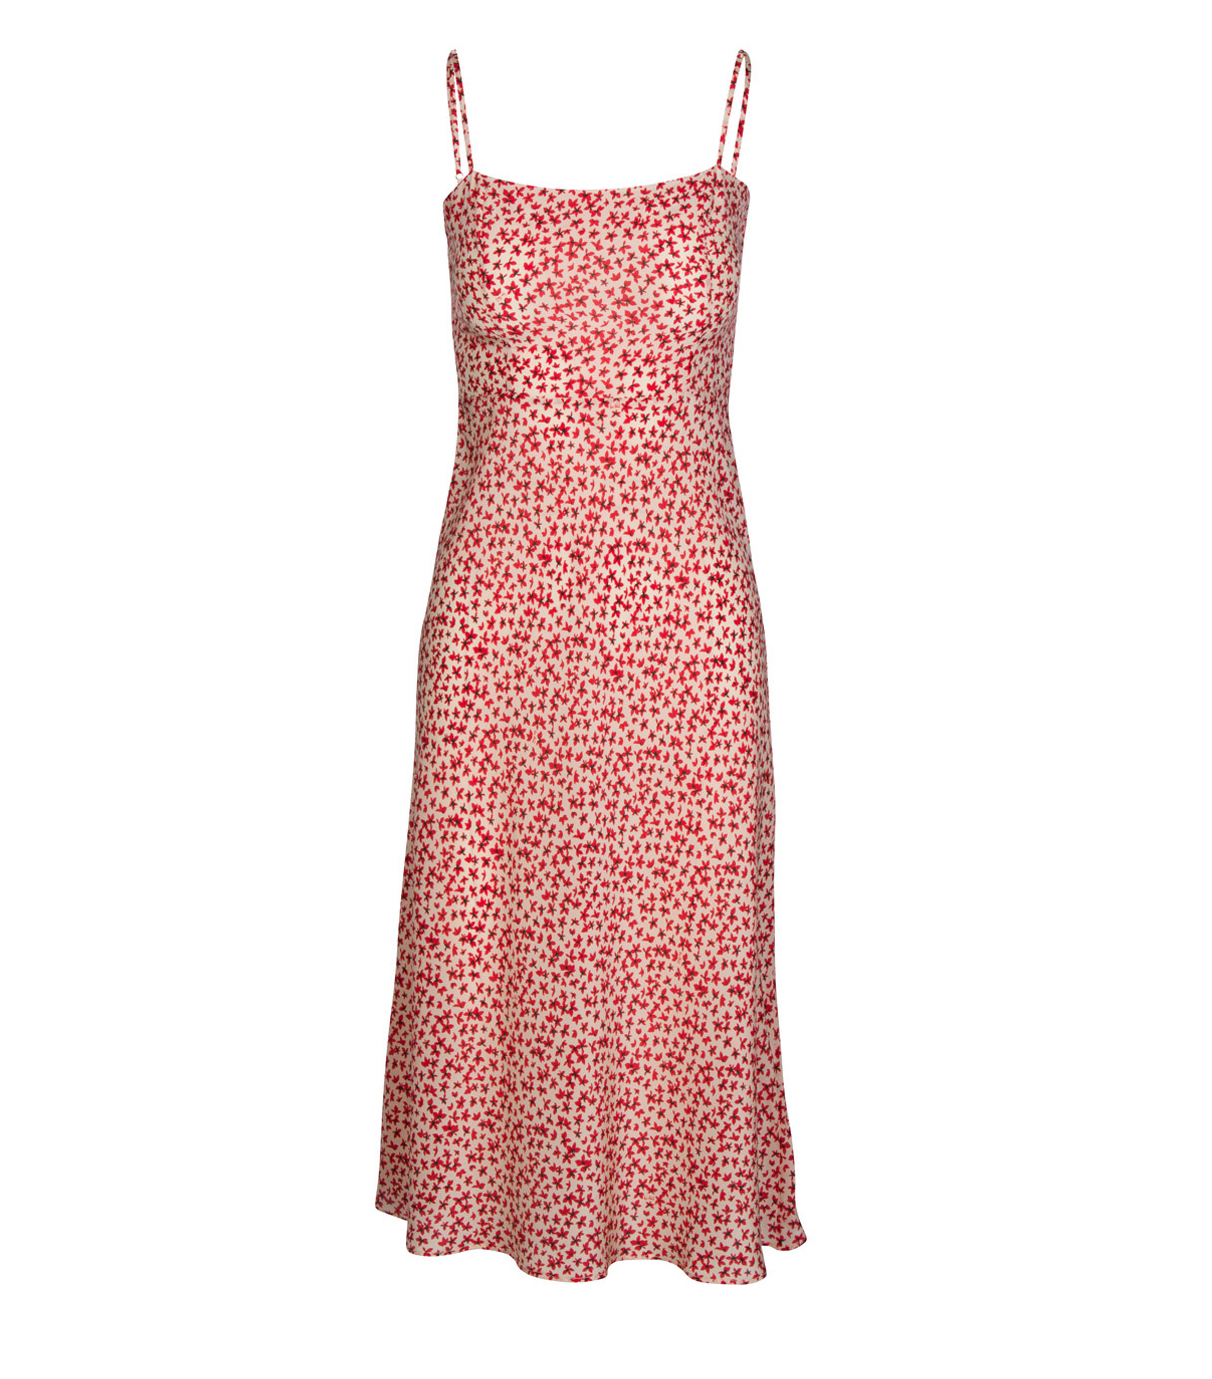 Easy Slip Dresses We Can't Get Enough Of | Who What Wear UK